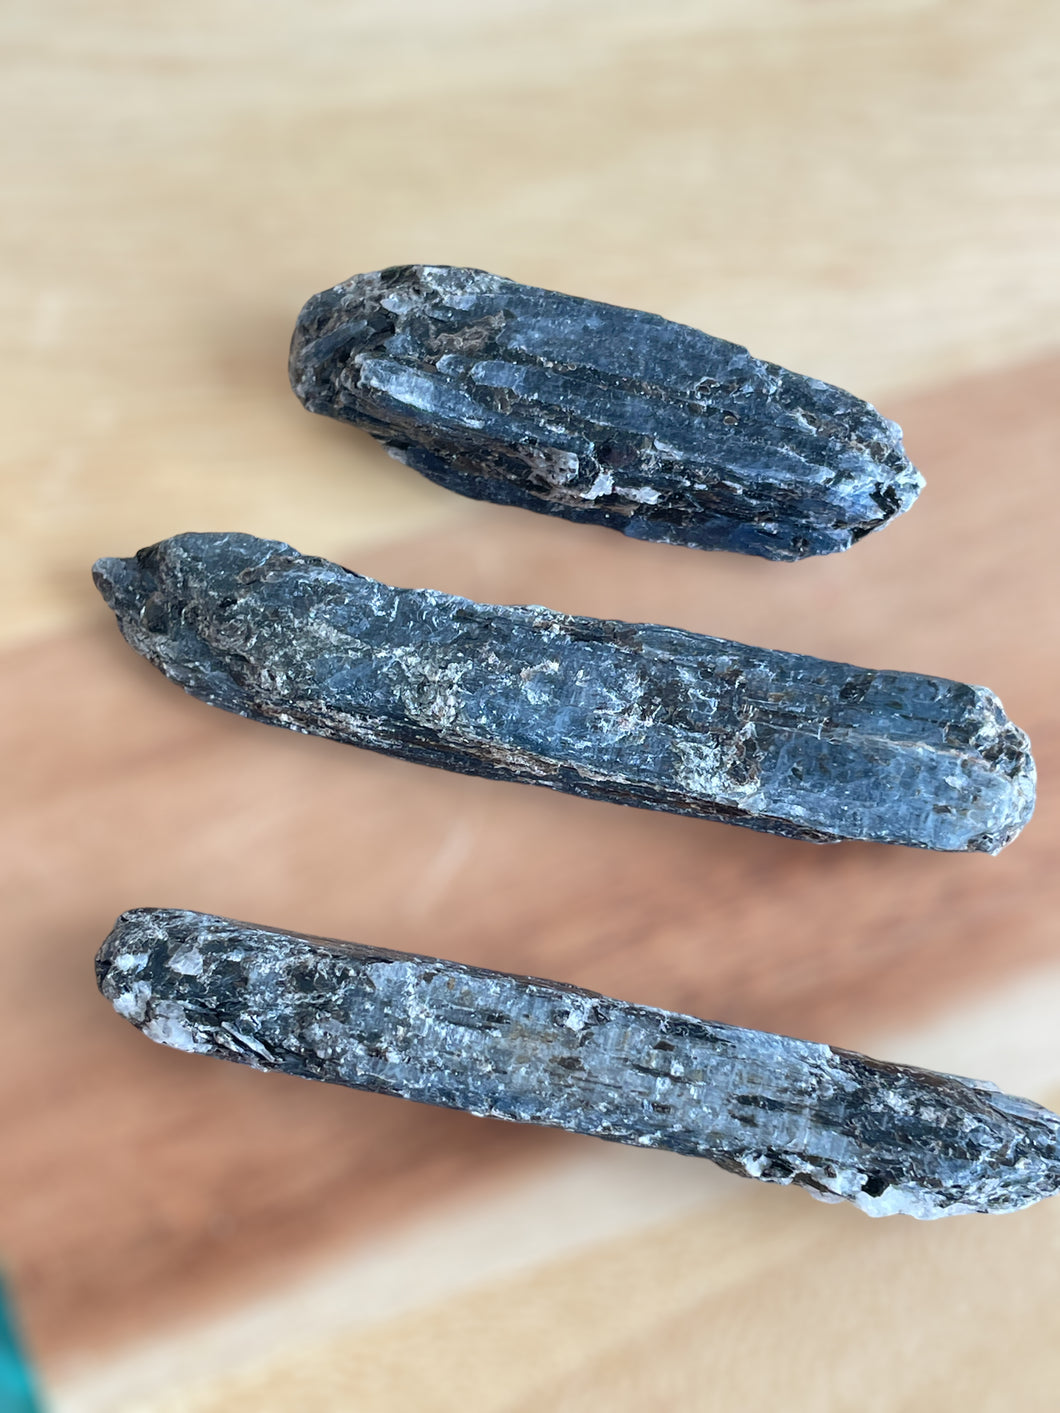 Set of 3 Blue Kyanite with mica from Zambia ZB17 with info card